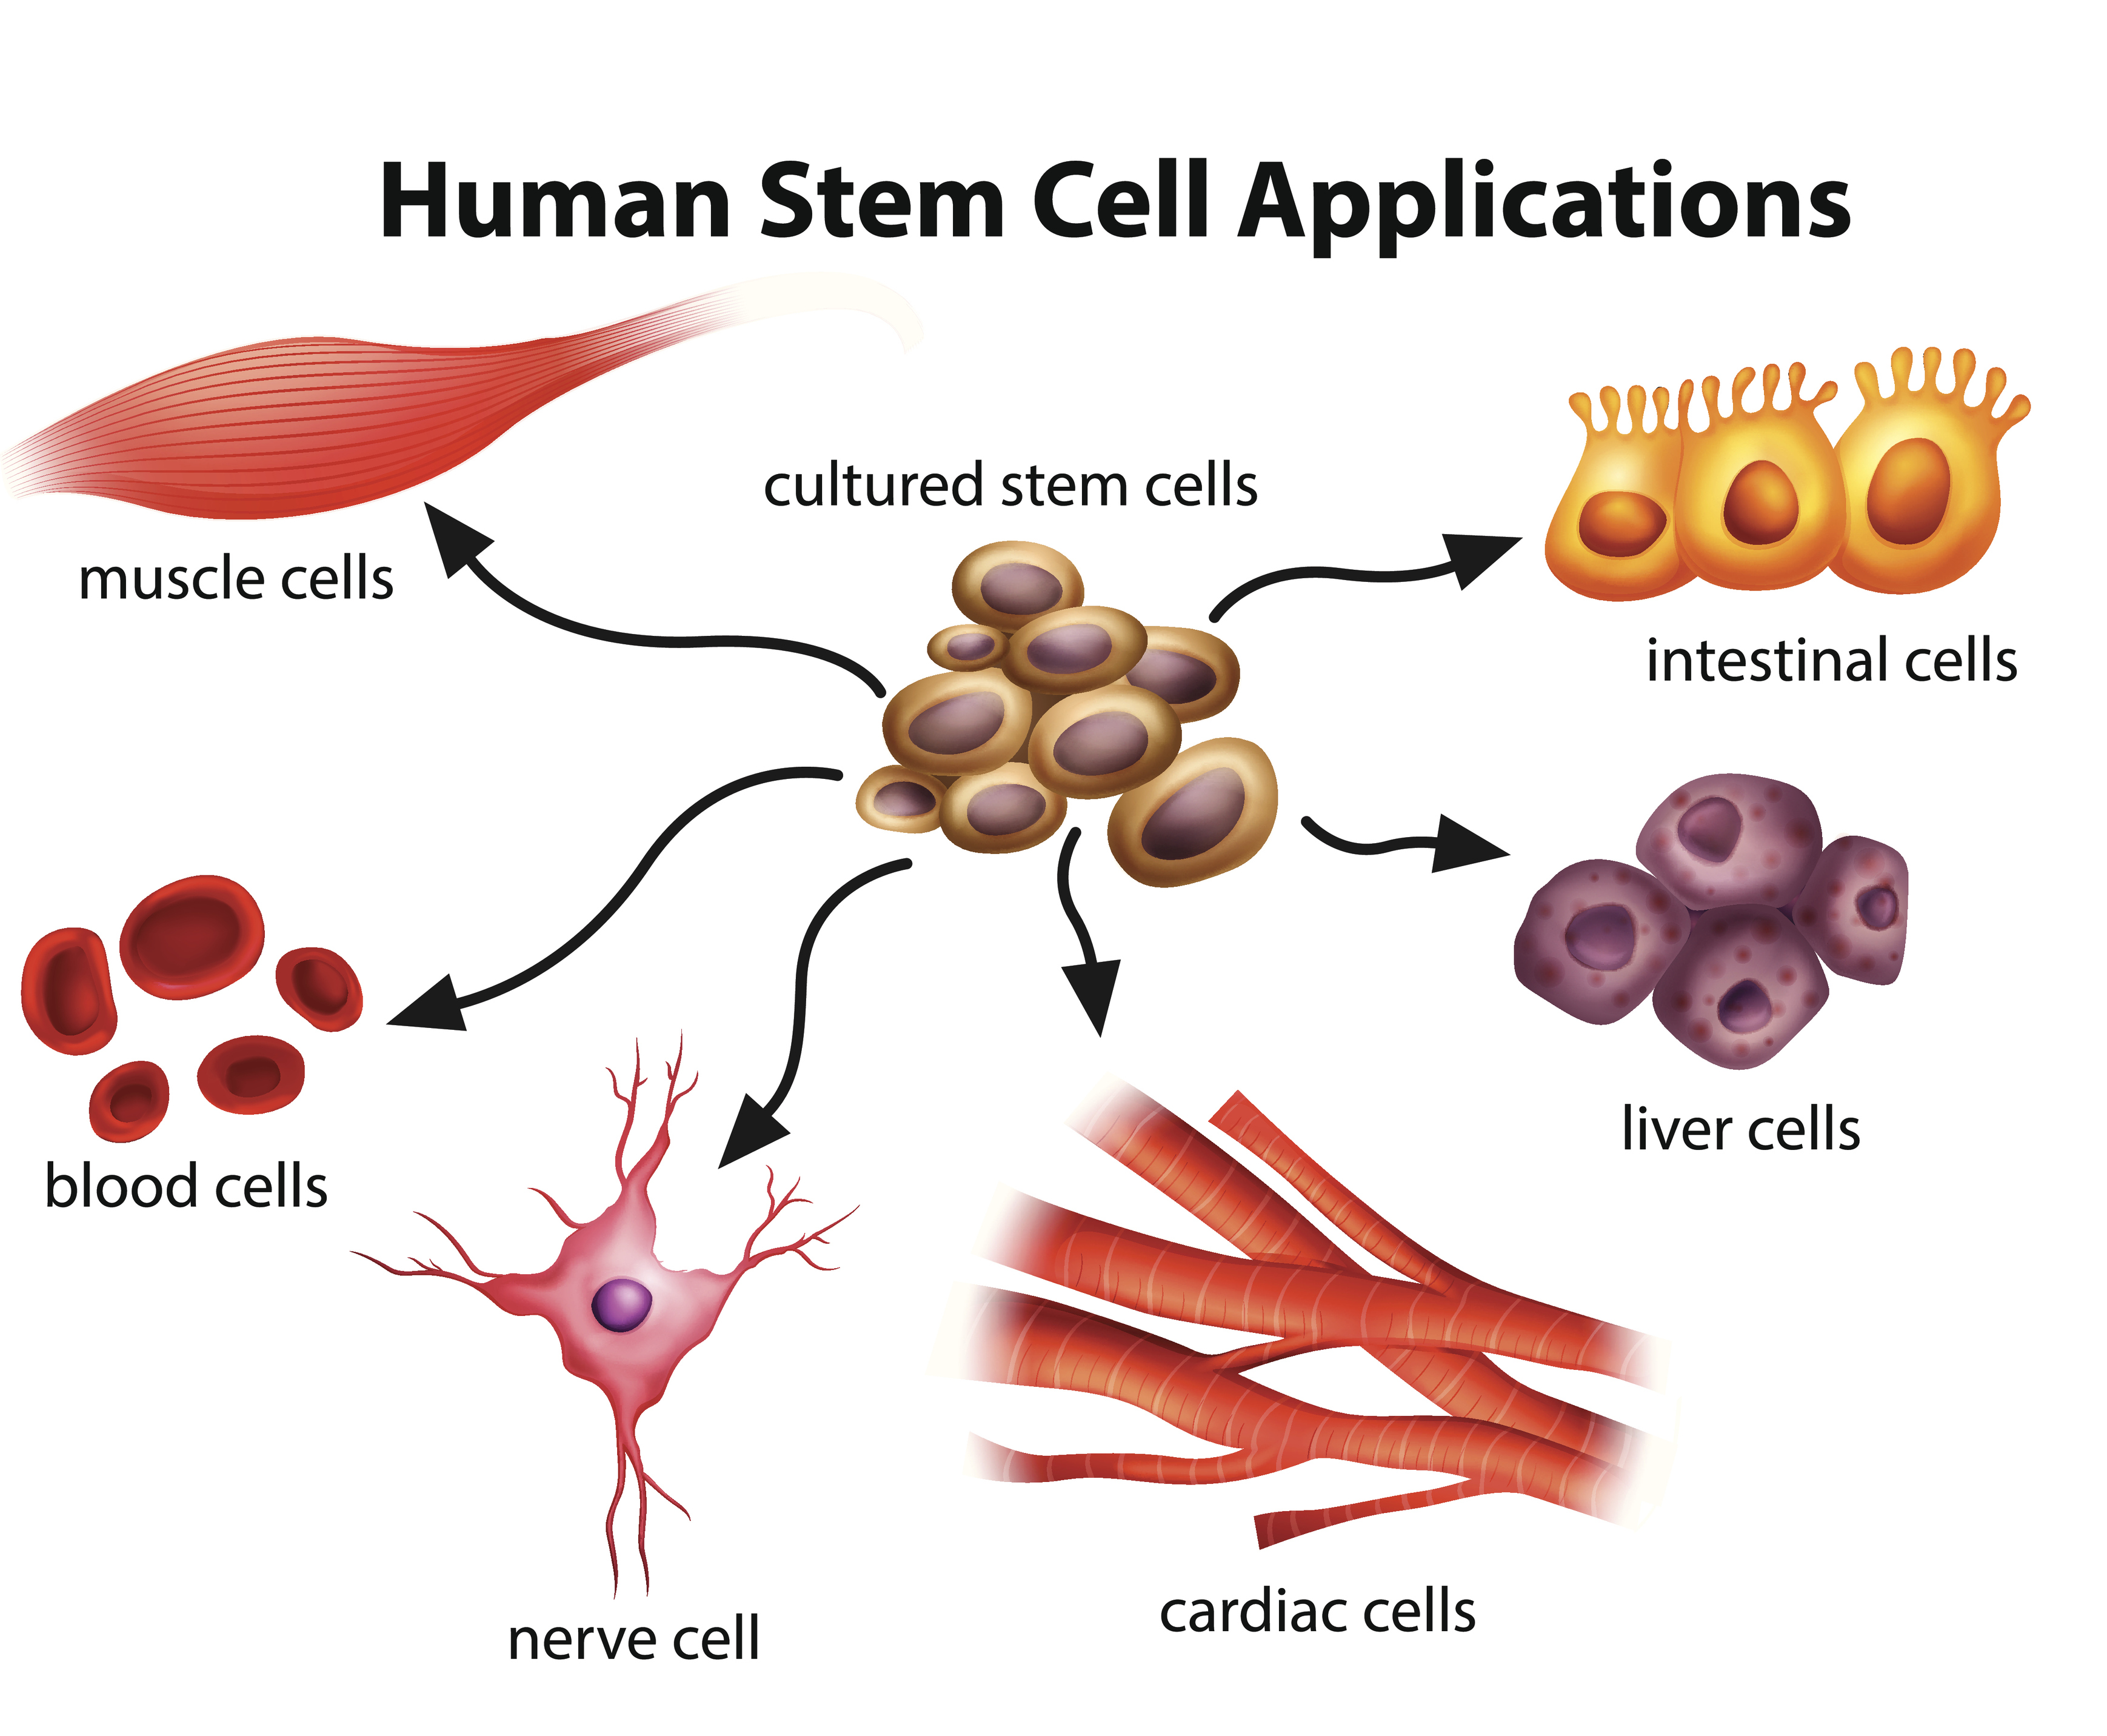 weMED Human Stem Cell applications, muscle cells, cultured stem cell, intestinal cells , 4126 Southwest Fwy # 1130, Houston, TX 77027, United States